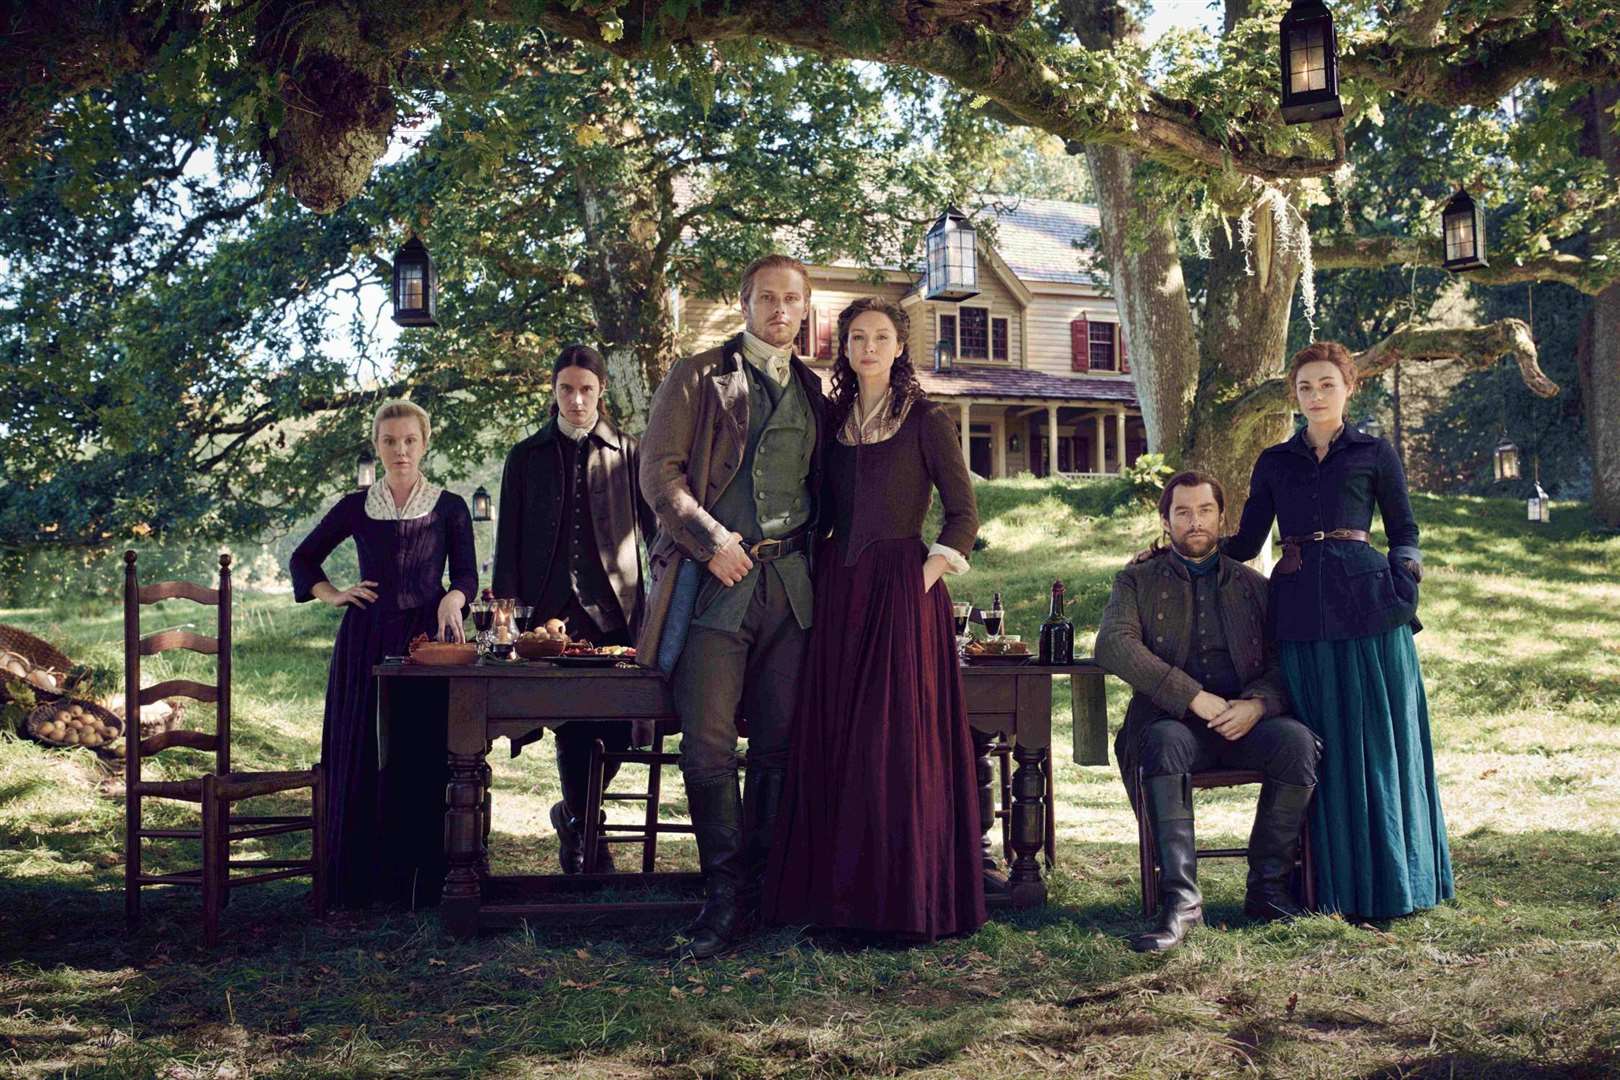 The main cast from the popular Outlander series.